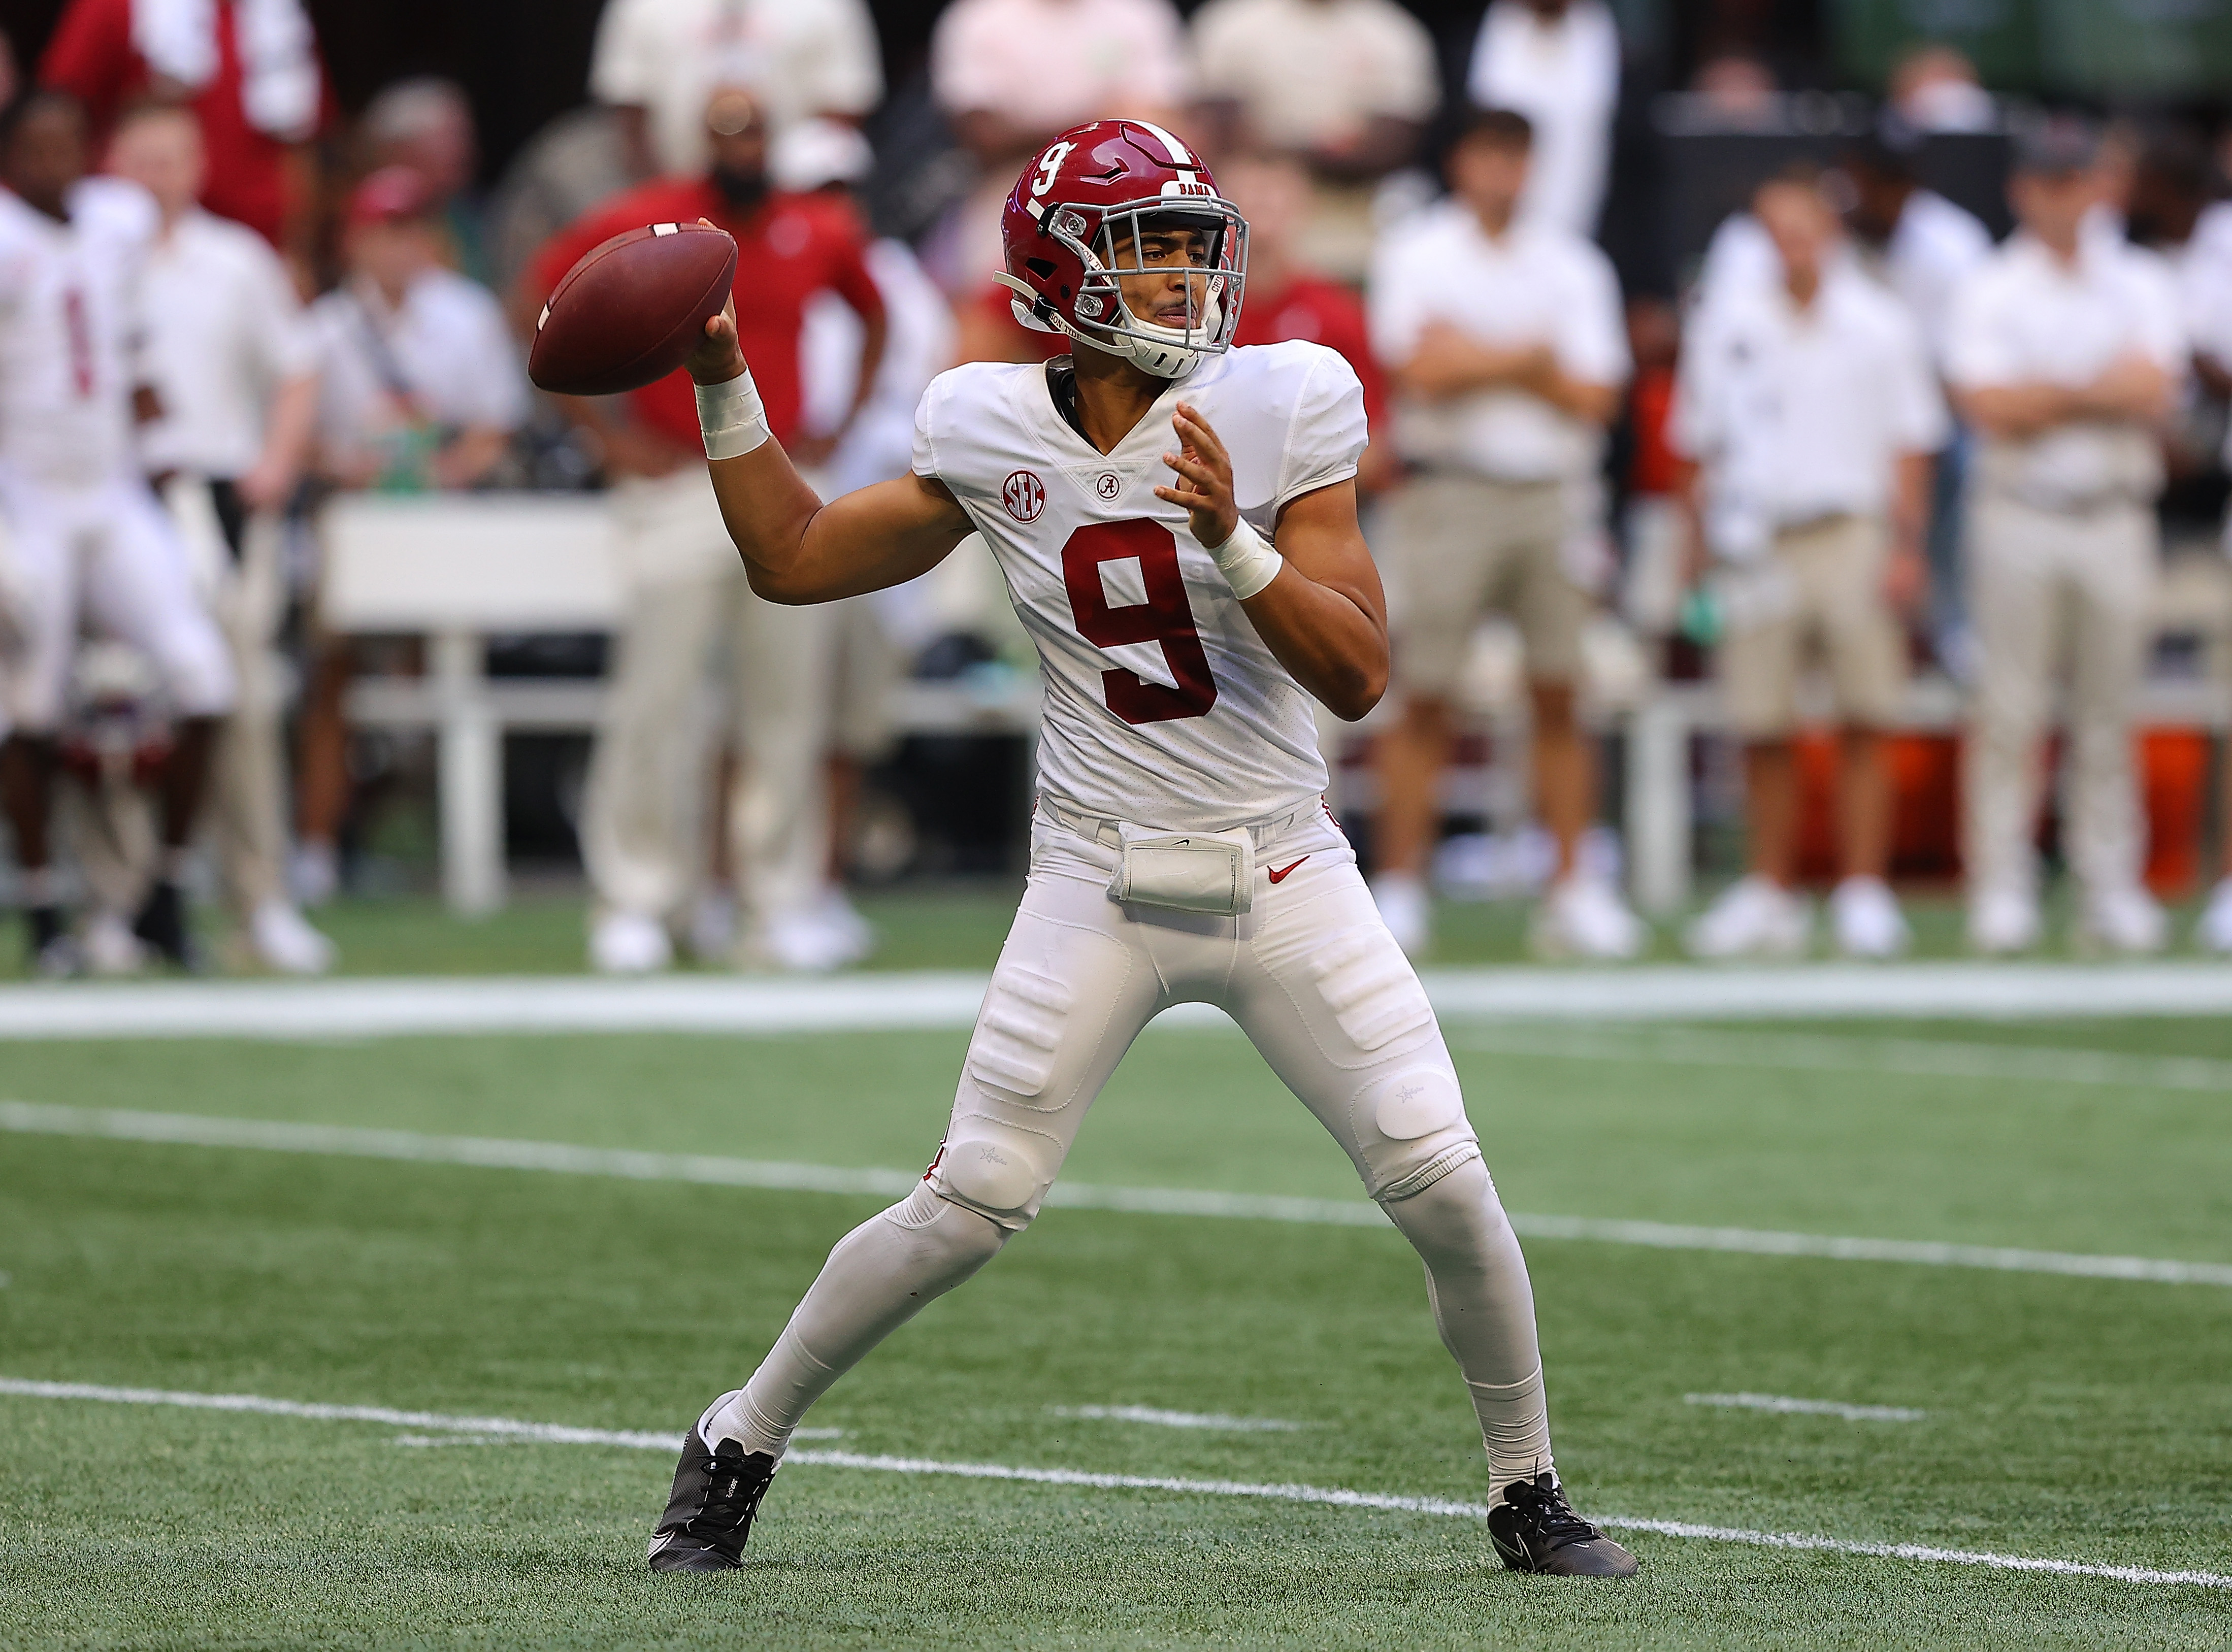 Bryce Young (QB, Alabama): Dynasty and NFL Draft Outlook